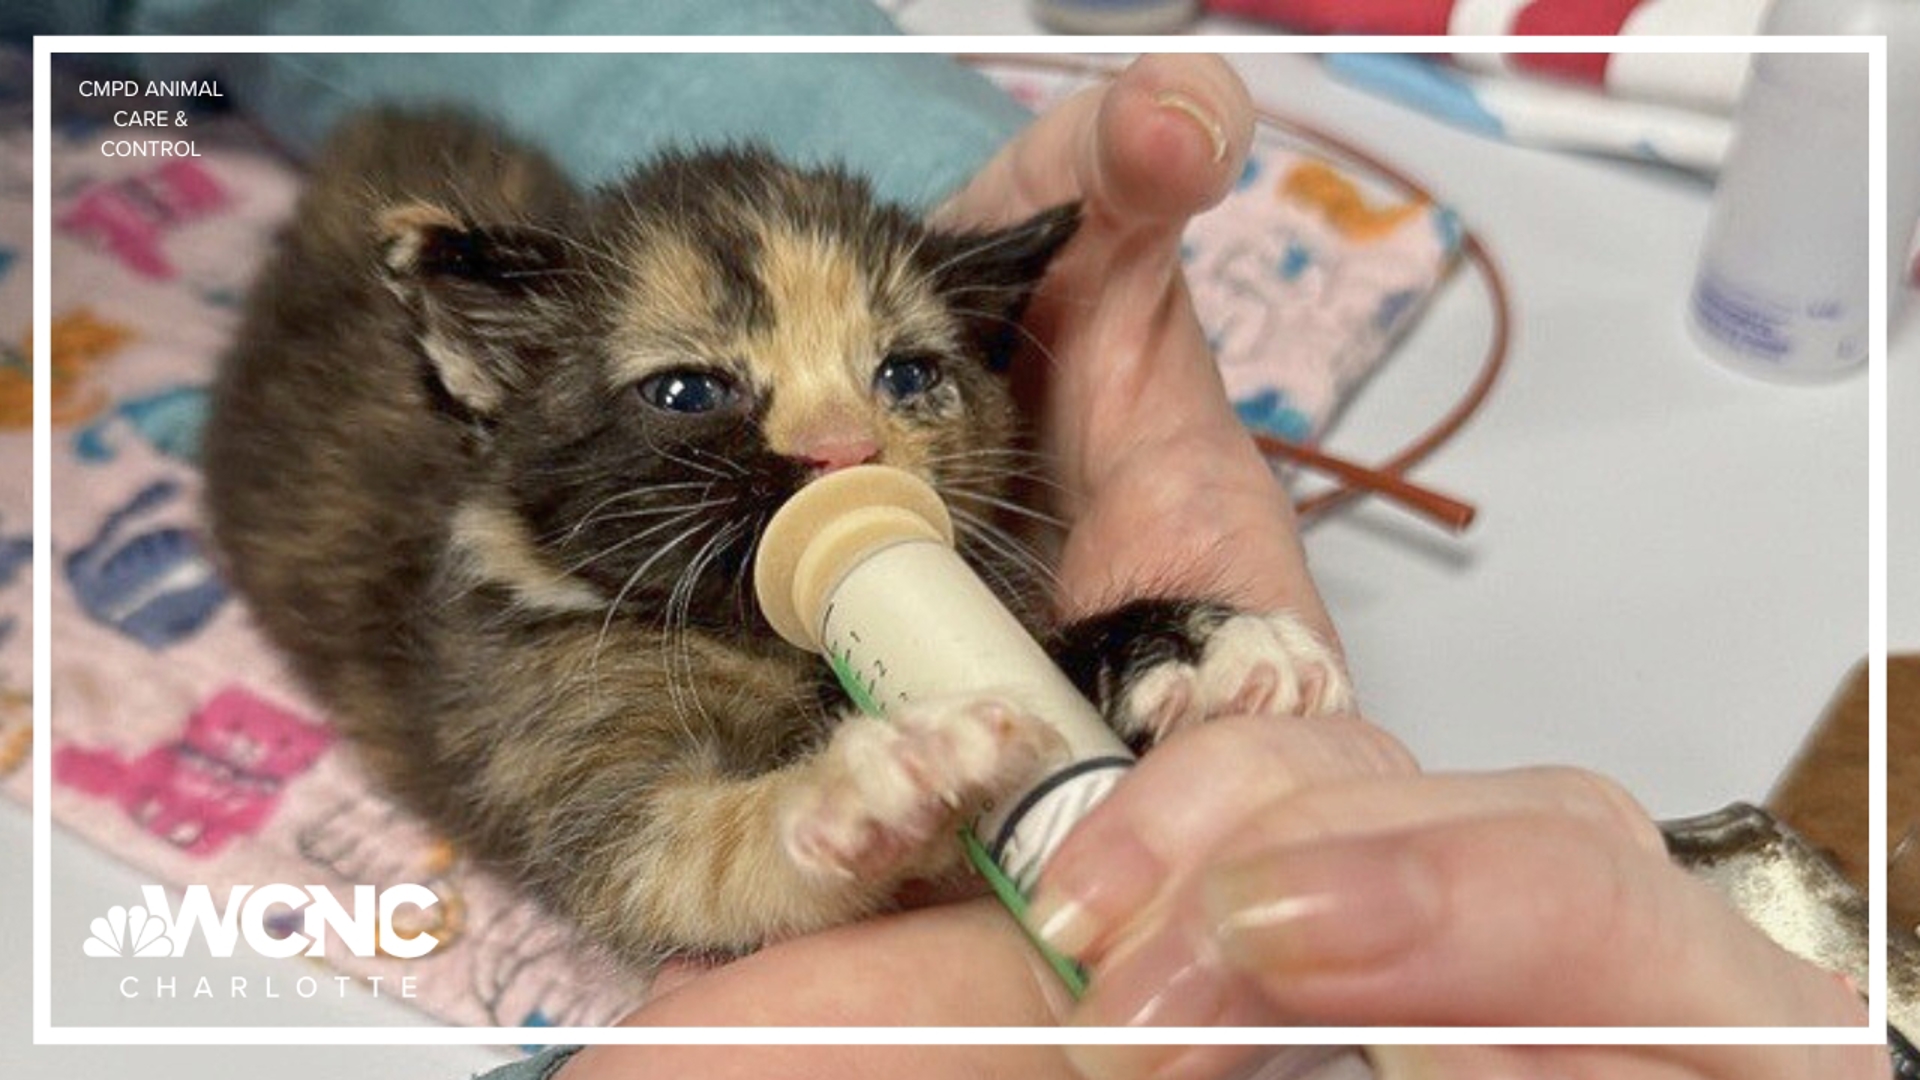 CMPD Animal Care and Control is running out of room to house the booming cat population. Fosters and kitten volunteers can help ease the burden.